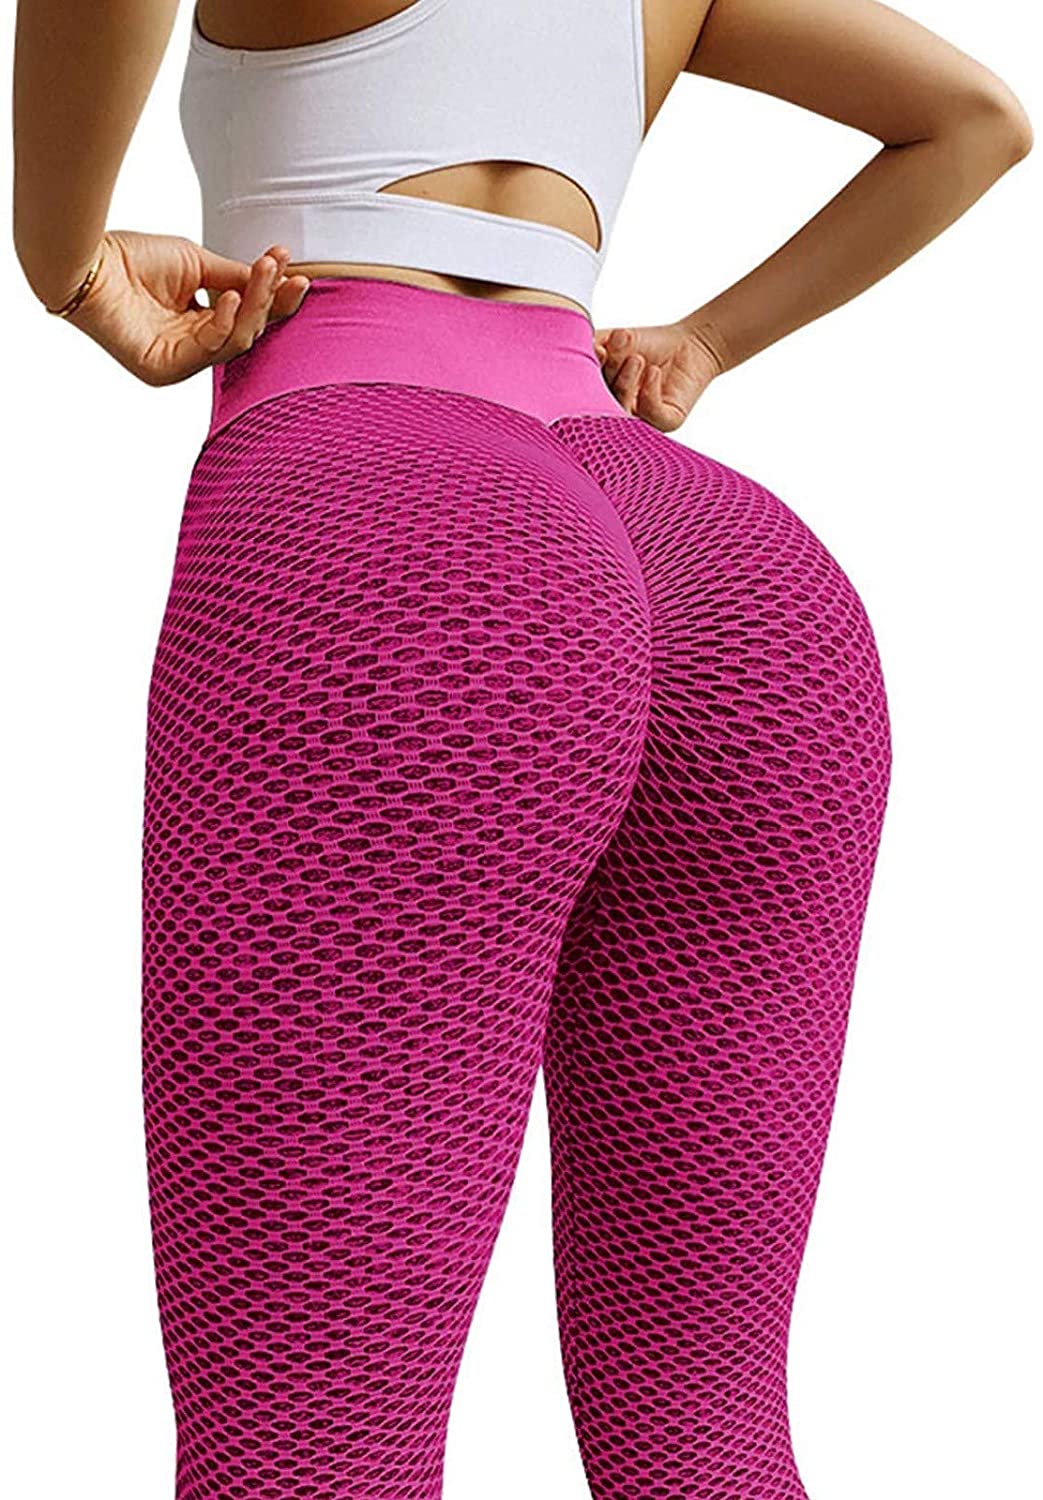 ALL WOMEN Should Own These Leggings! Tummy Tuck and Butt Lift in a